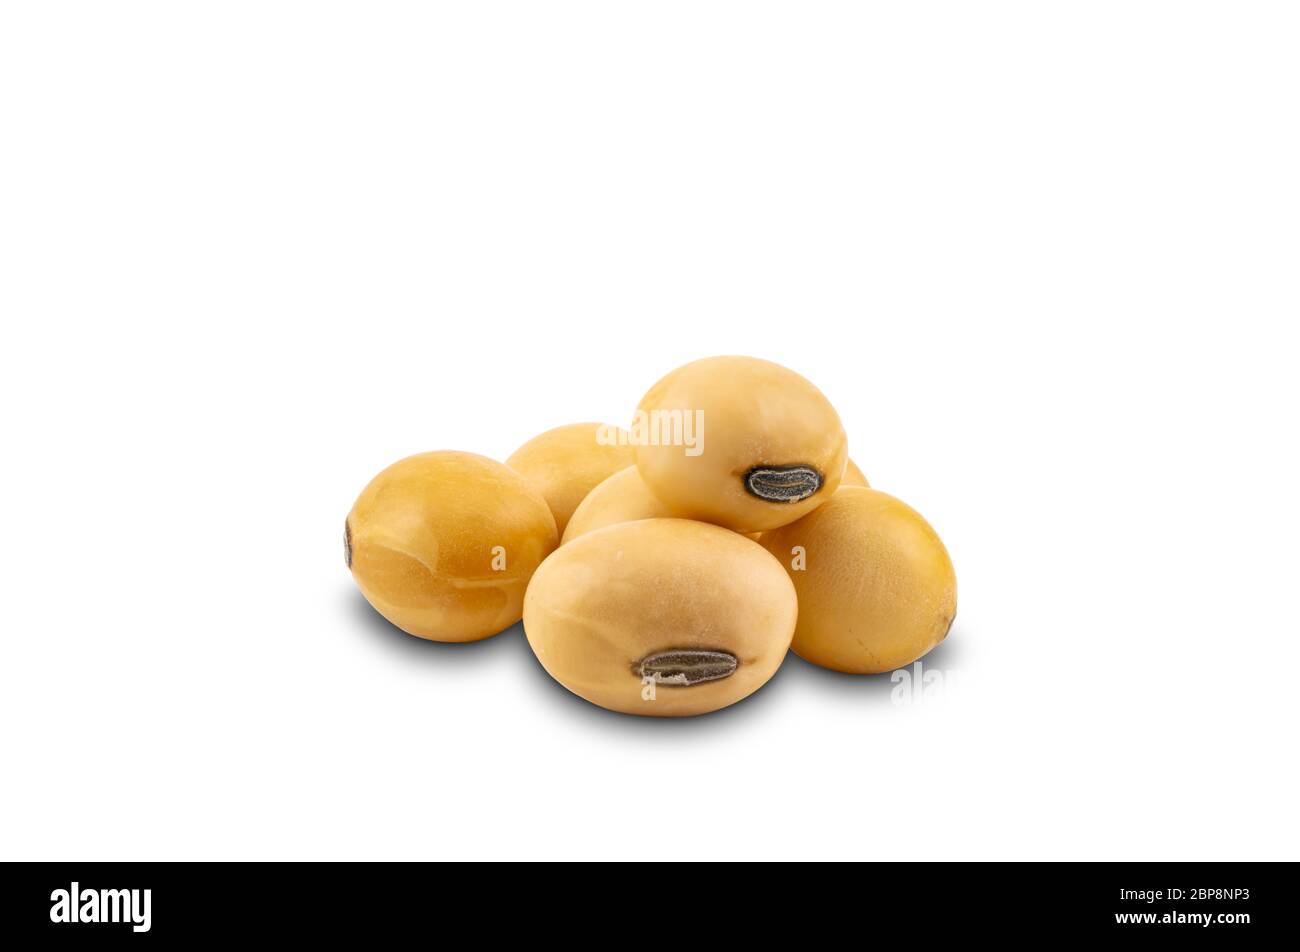 Soy beans on white background with clipping path. Soy bean or soyabean or Glycine max is a species of legume that provide vegetable protein for millio Stock Photo